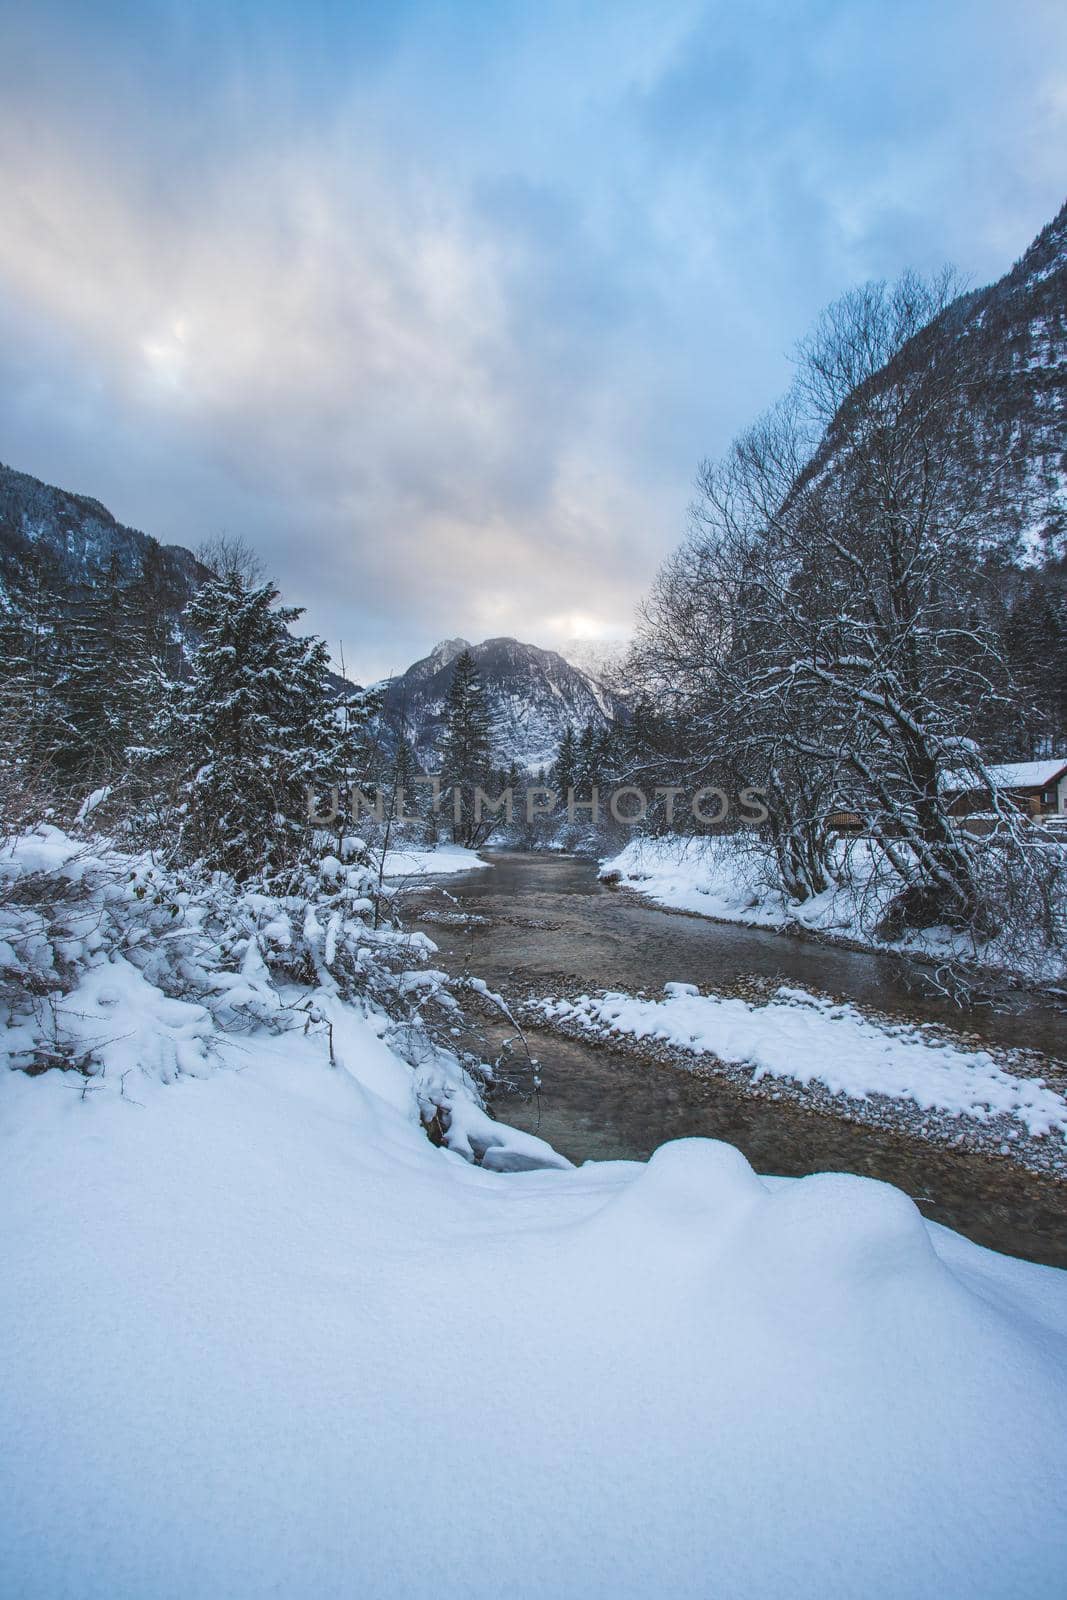 Winter landscape with frosty river, snowy trees and mountains. Buntautal and Bluntausee. by Daxenbichler